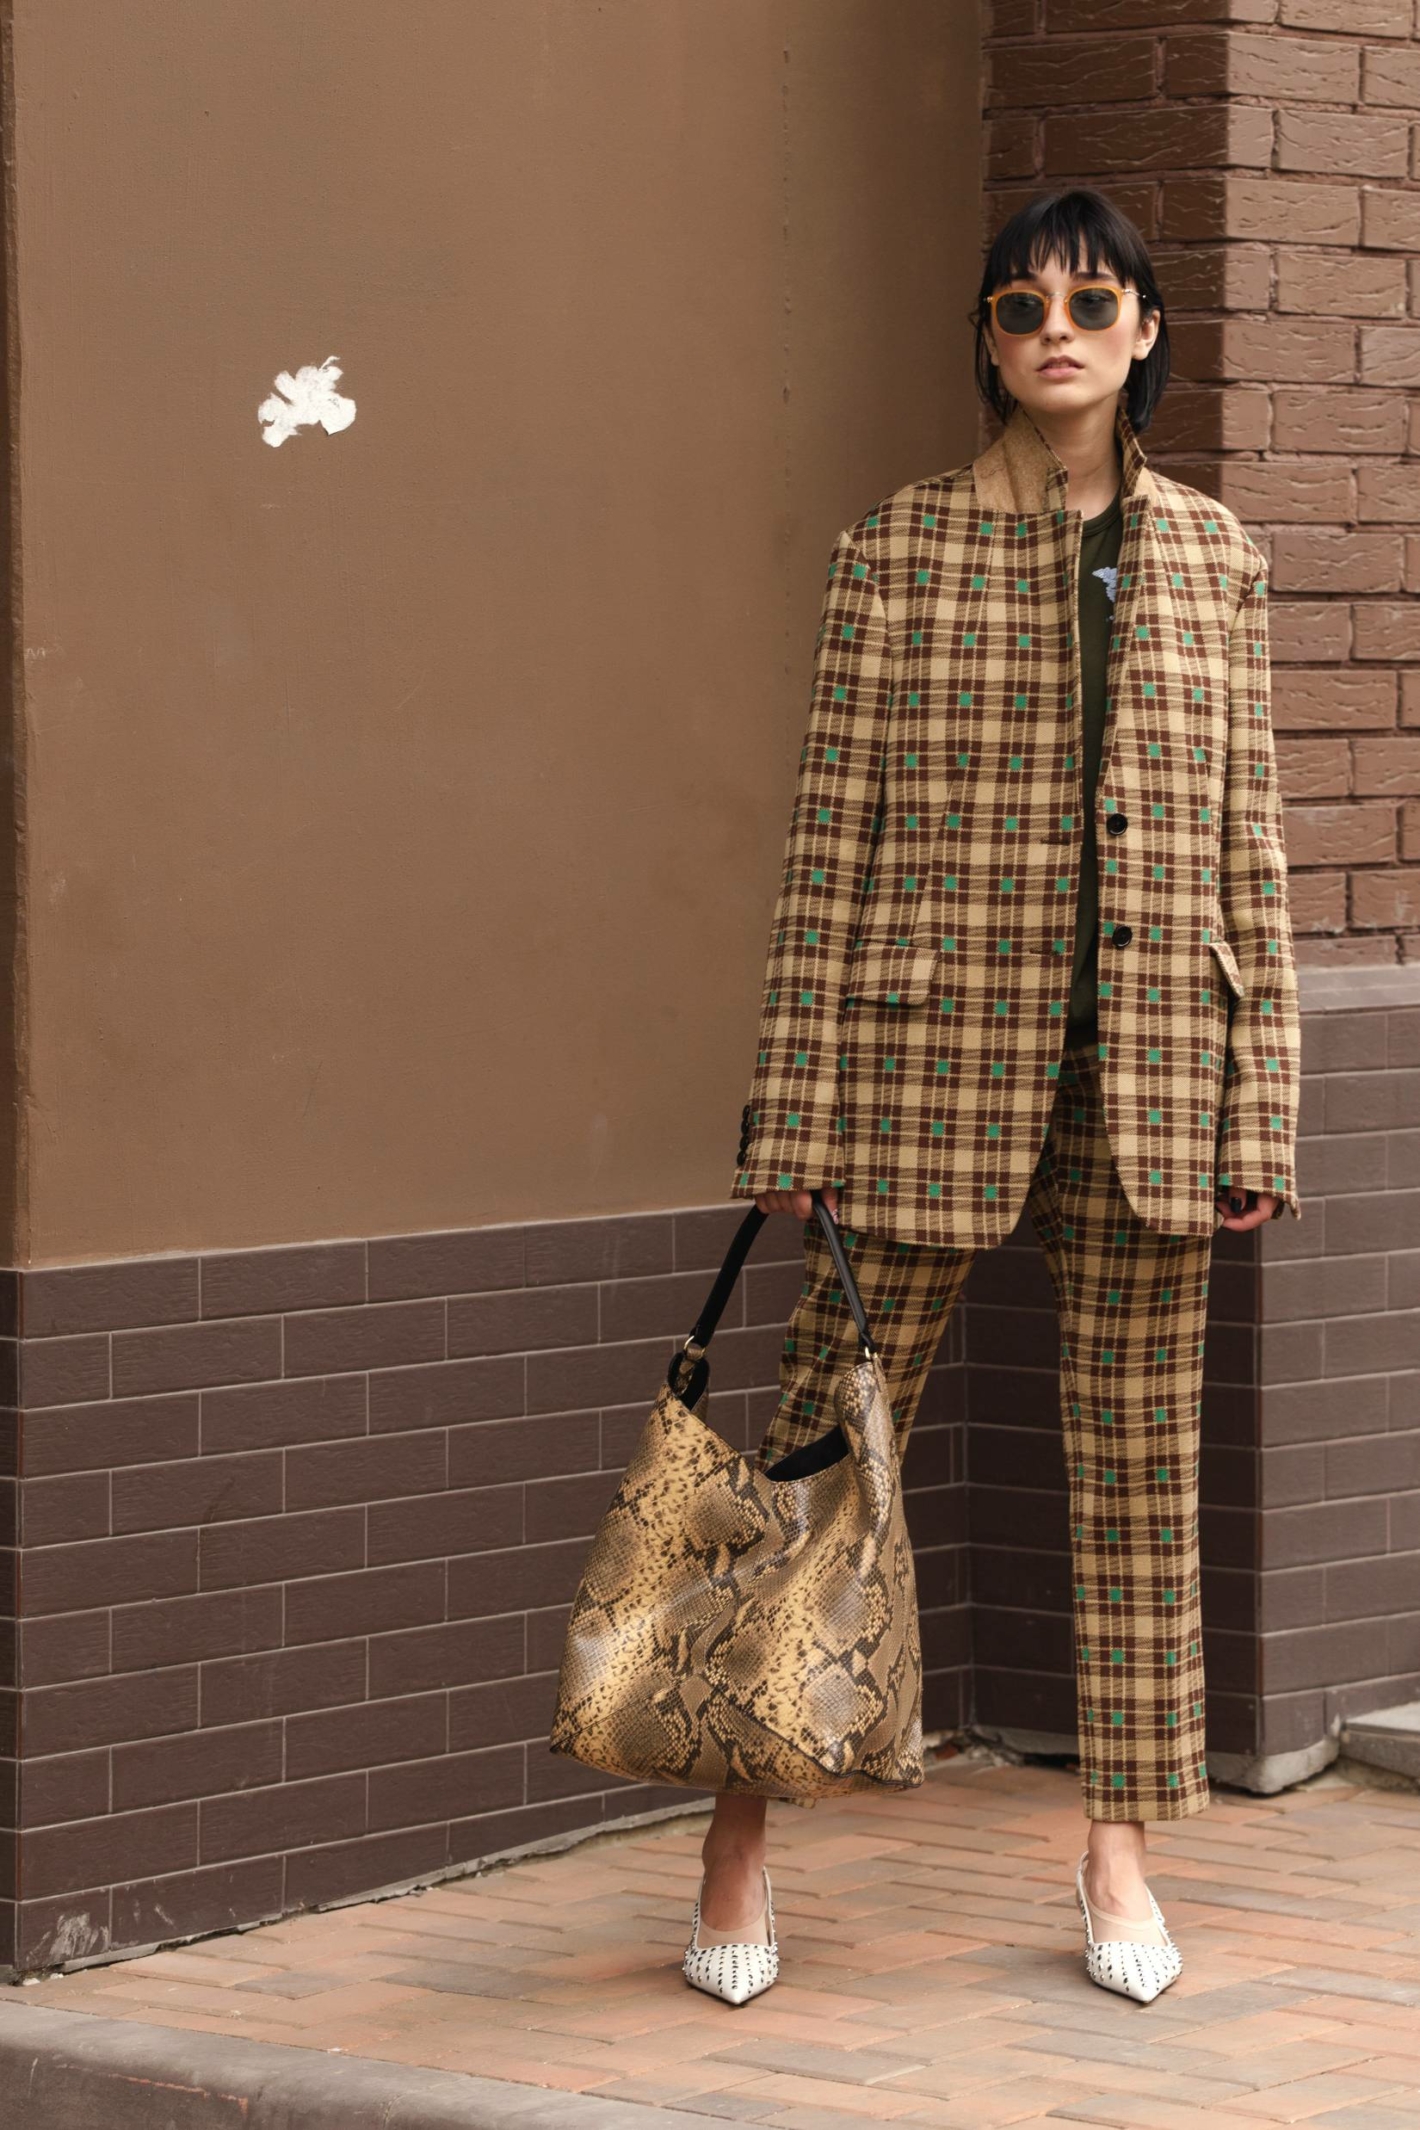 Girl in a beige jacket and trousers on a beige brick background © Street style photo/Shuttertsock